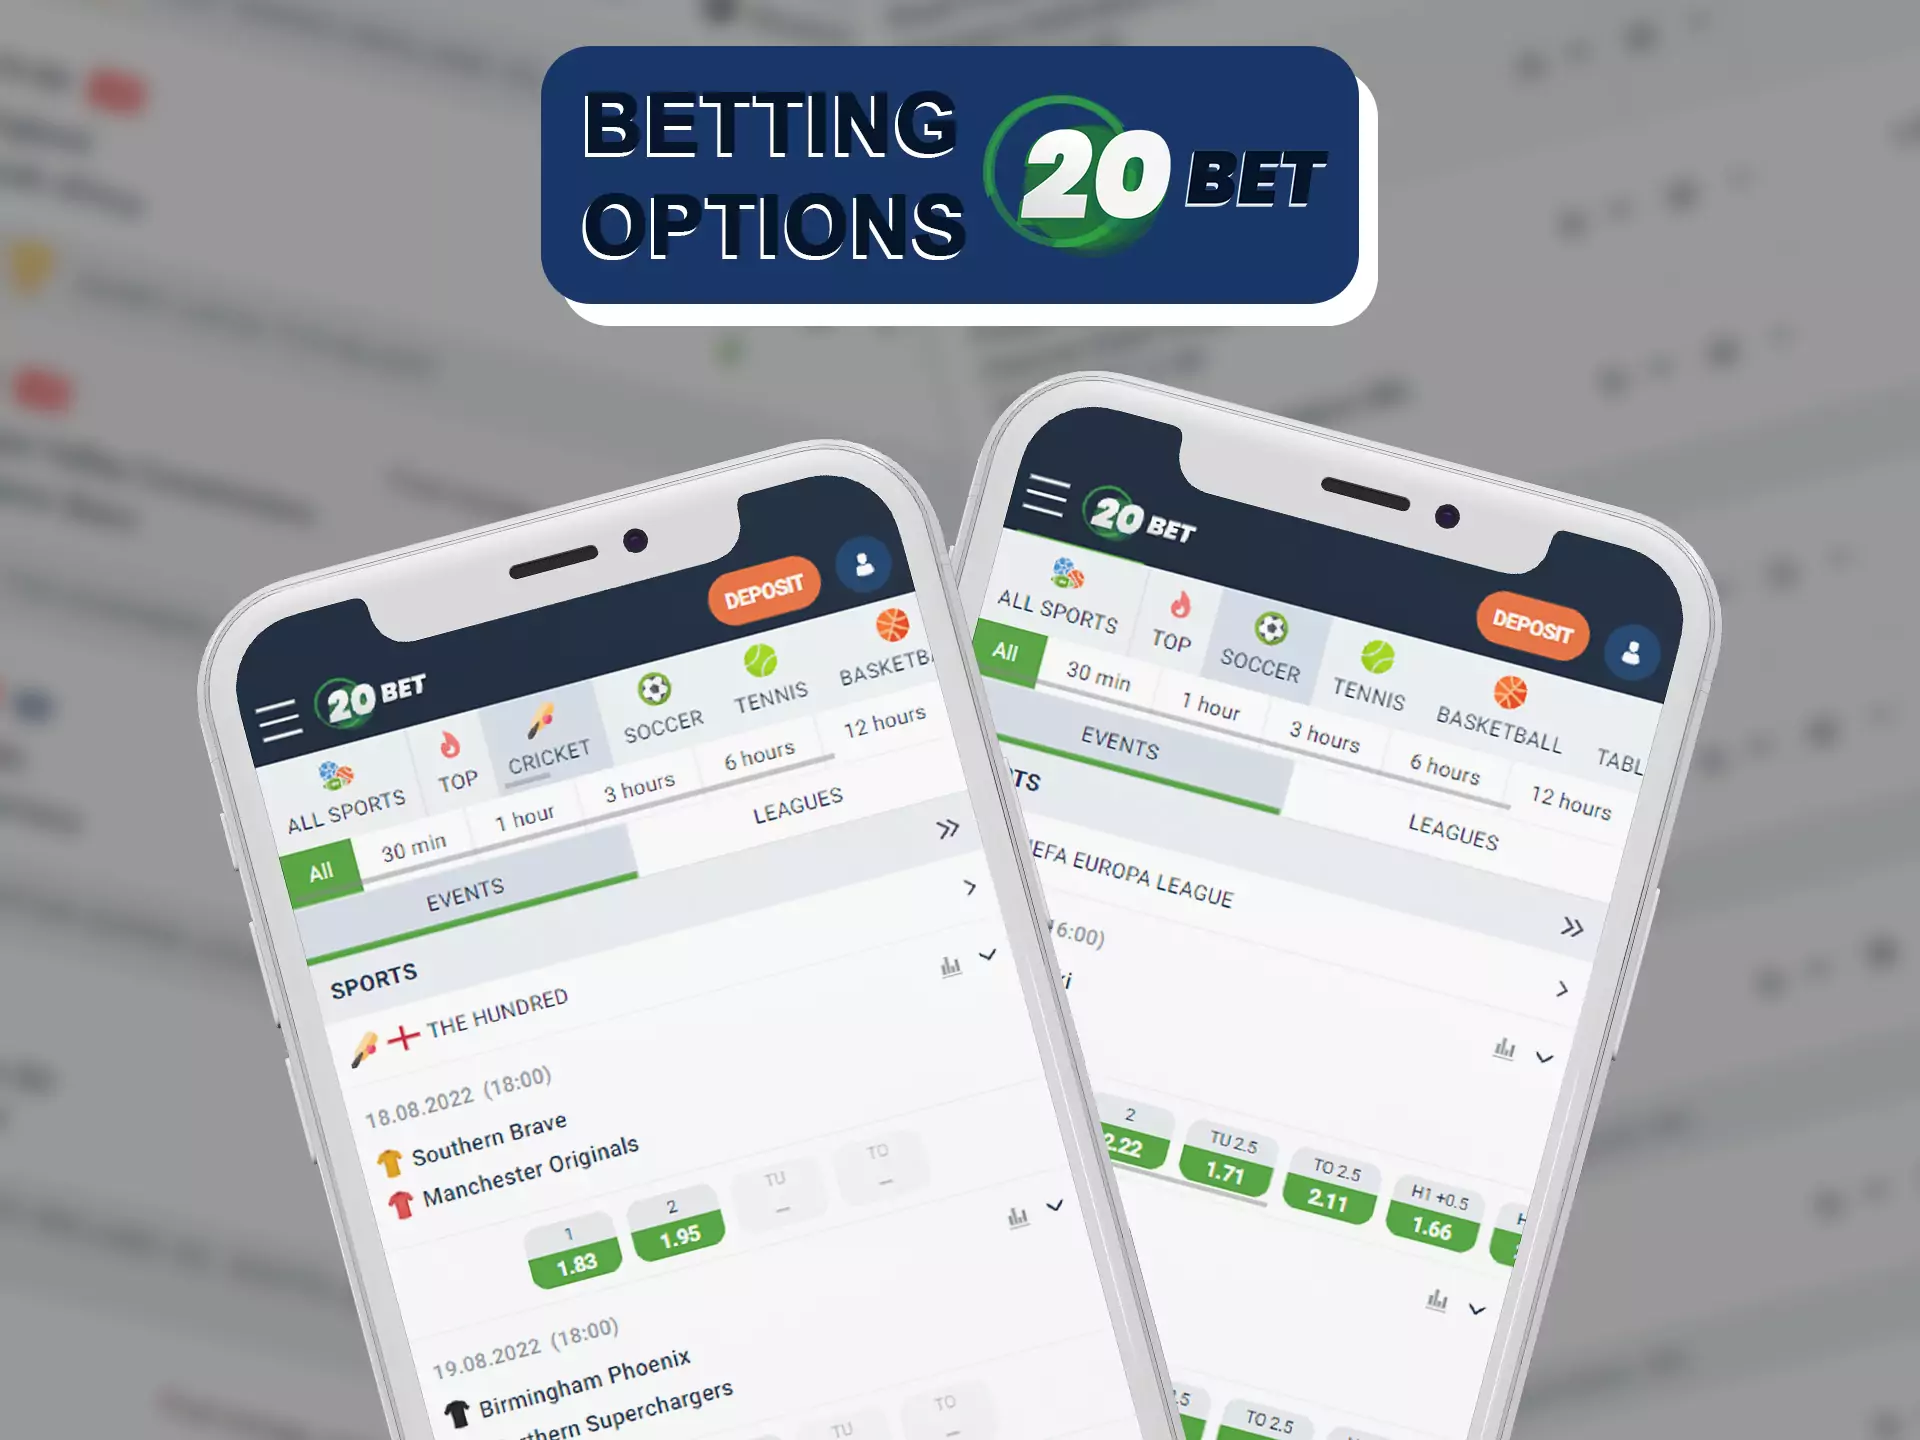 Choose how you want to bet at 20bet.